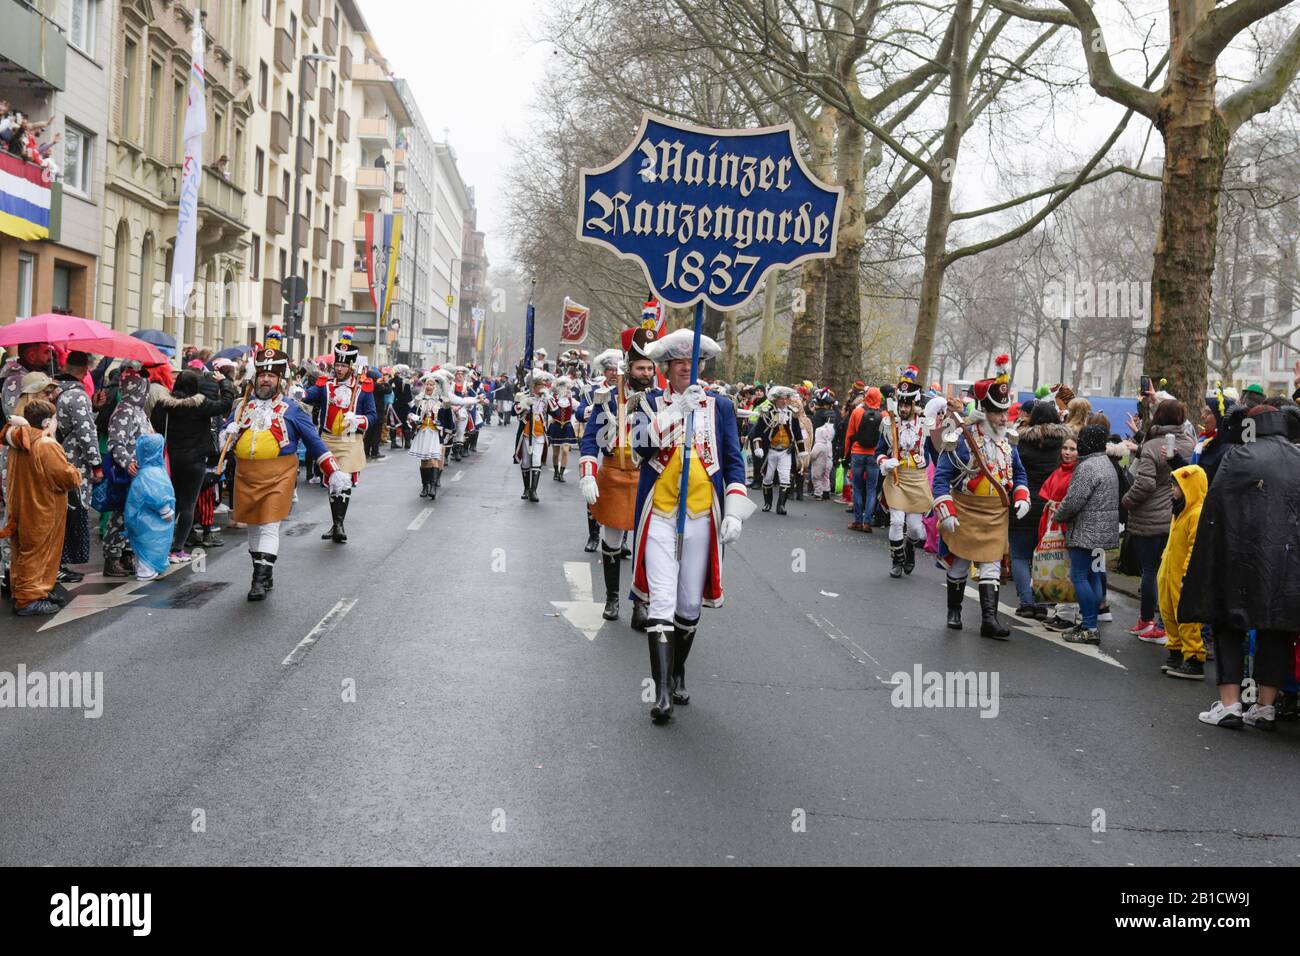 Mainz, Germany. 24th February 2020. Members of the Mainzer Ranzengarde take part in the the Mainz Rose Monday parade. Around half a million people lined the streets of Mainz for the traditional Rose Monday Carnival Parade. The 9 km long parade with over 9,000 participants is one of the three large Rose Monday Parades in Germany. Stock Photo